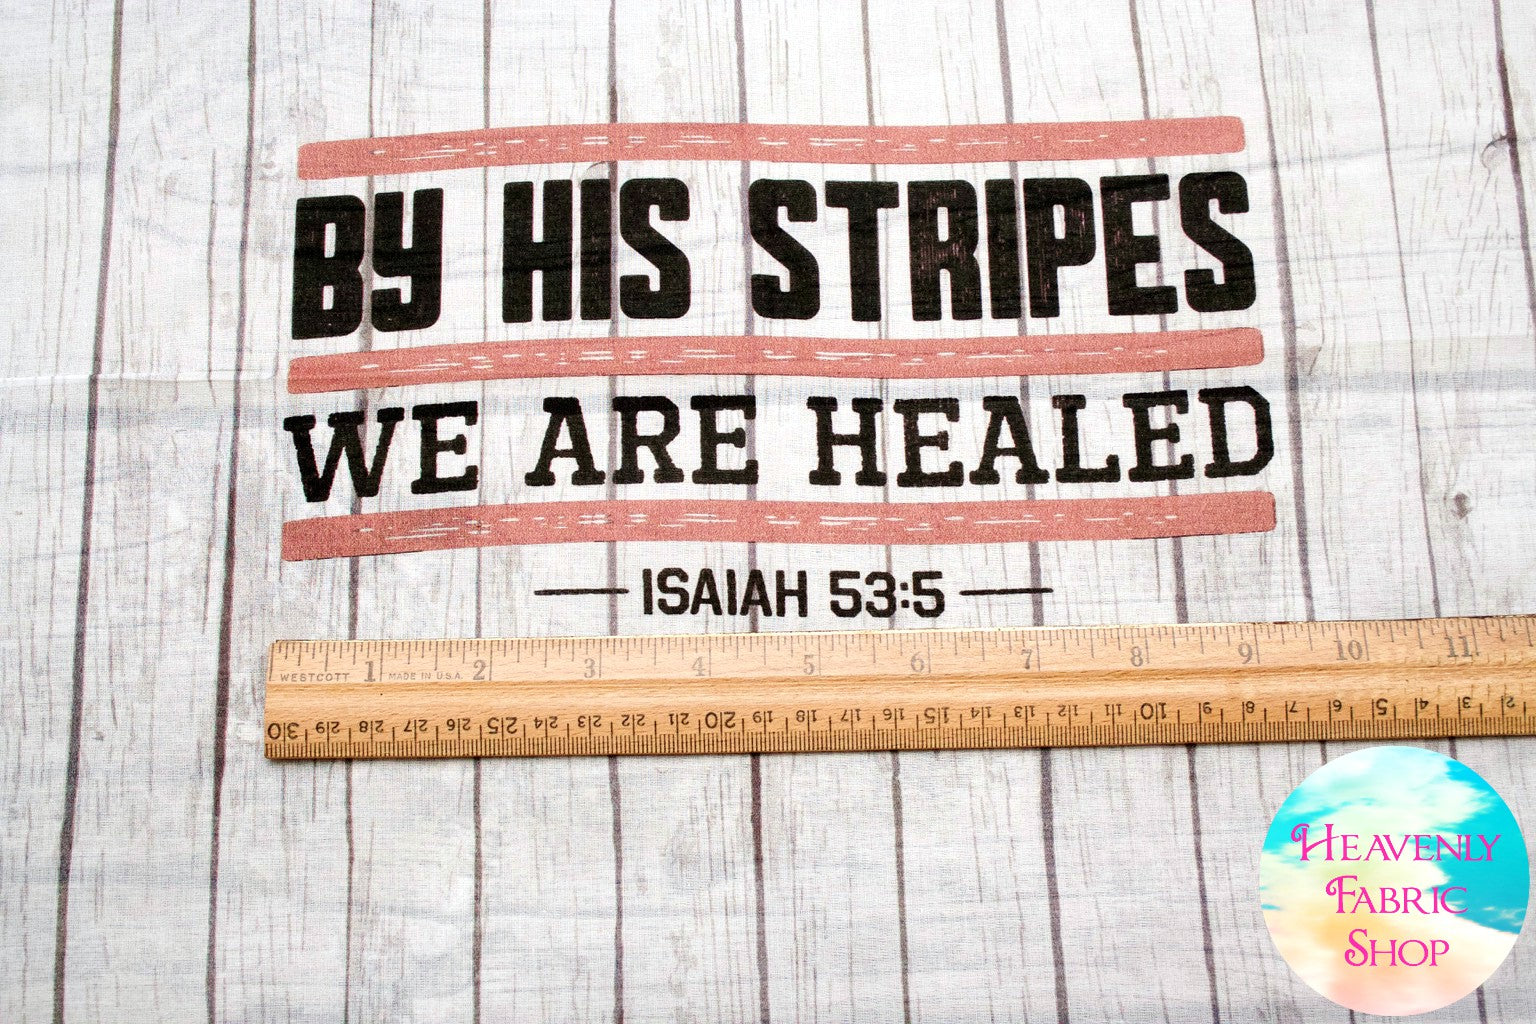 by his stripes we are healed esv